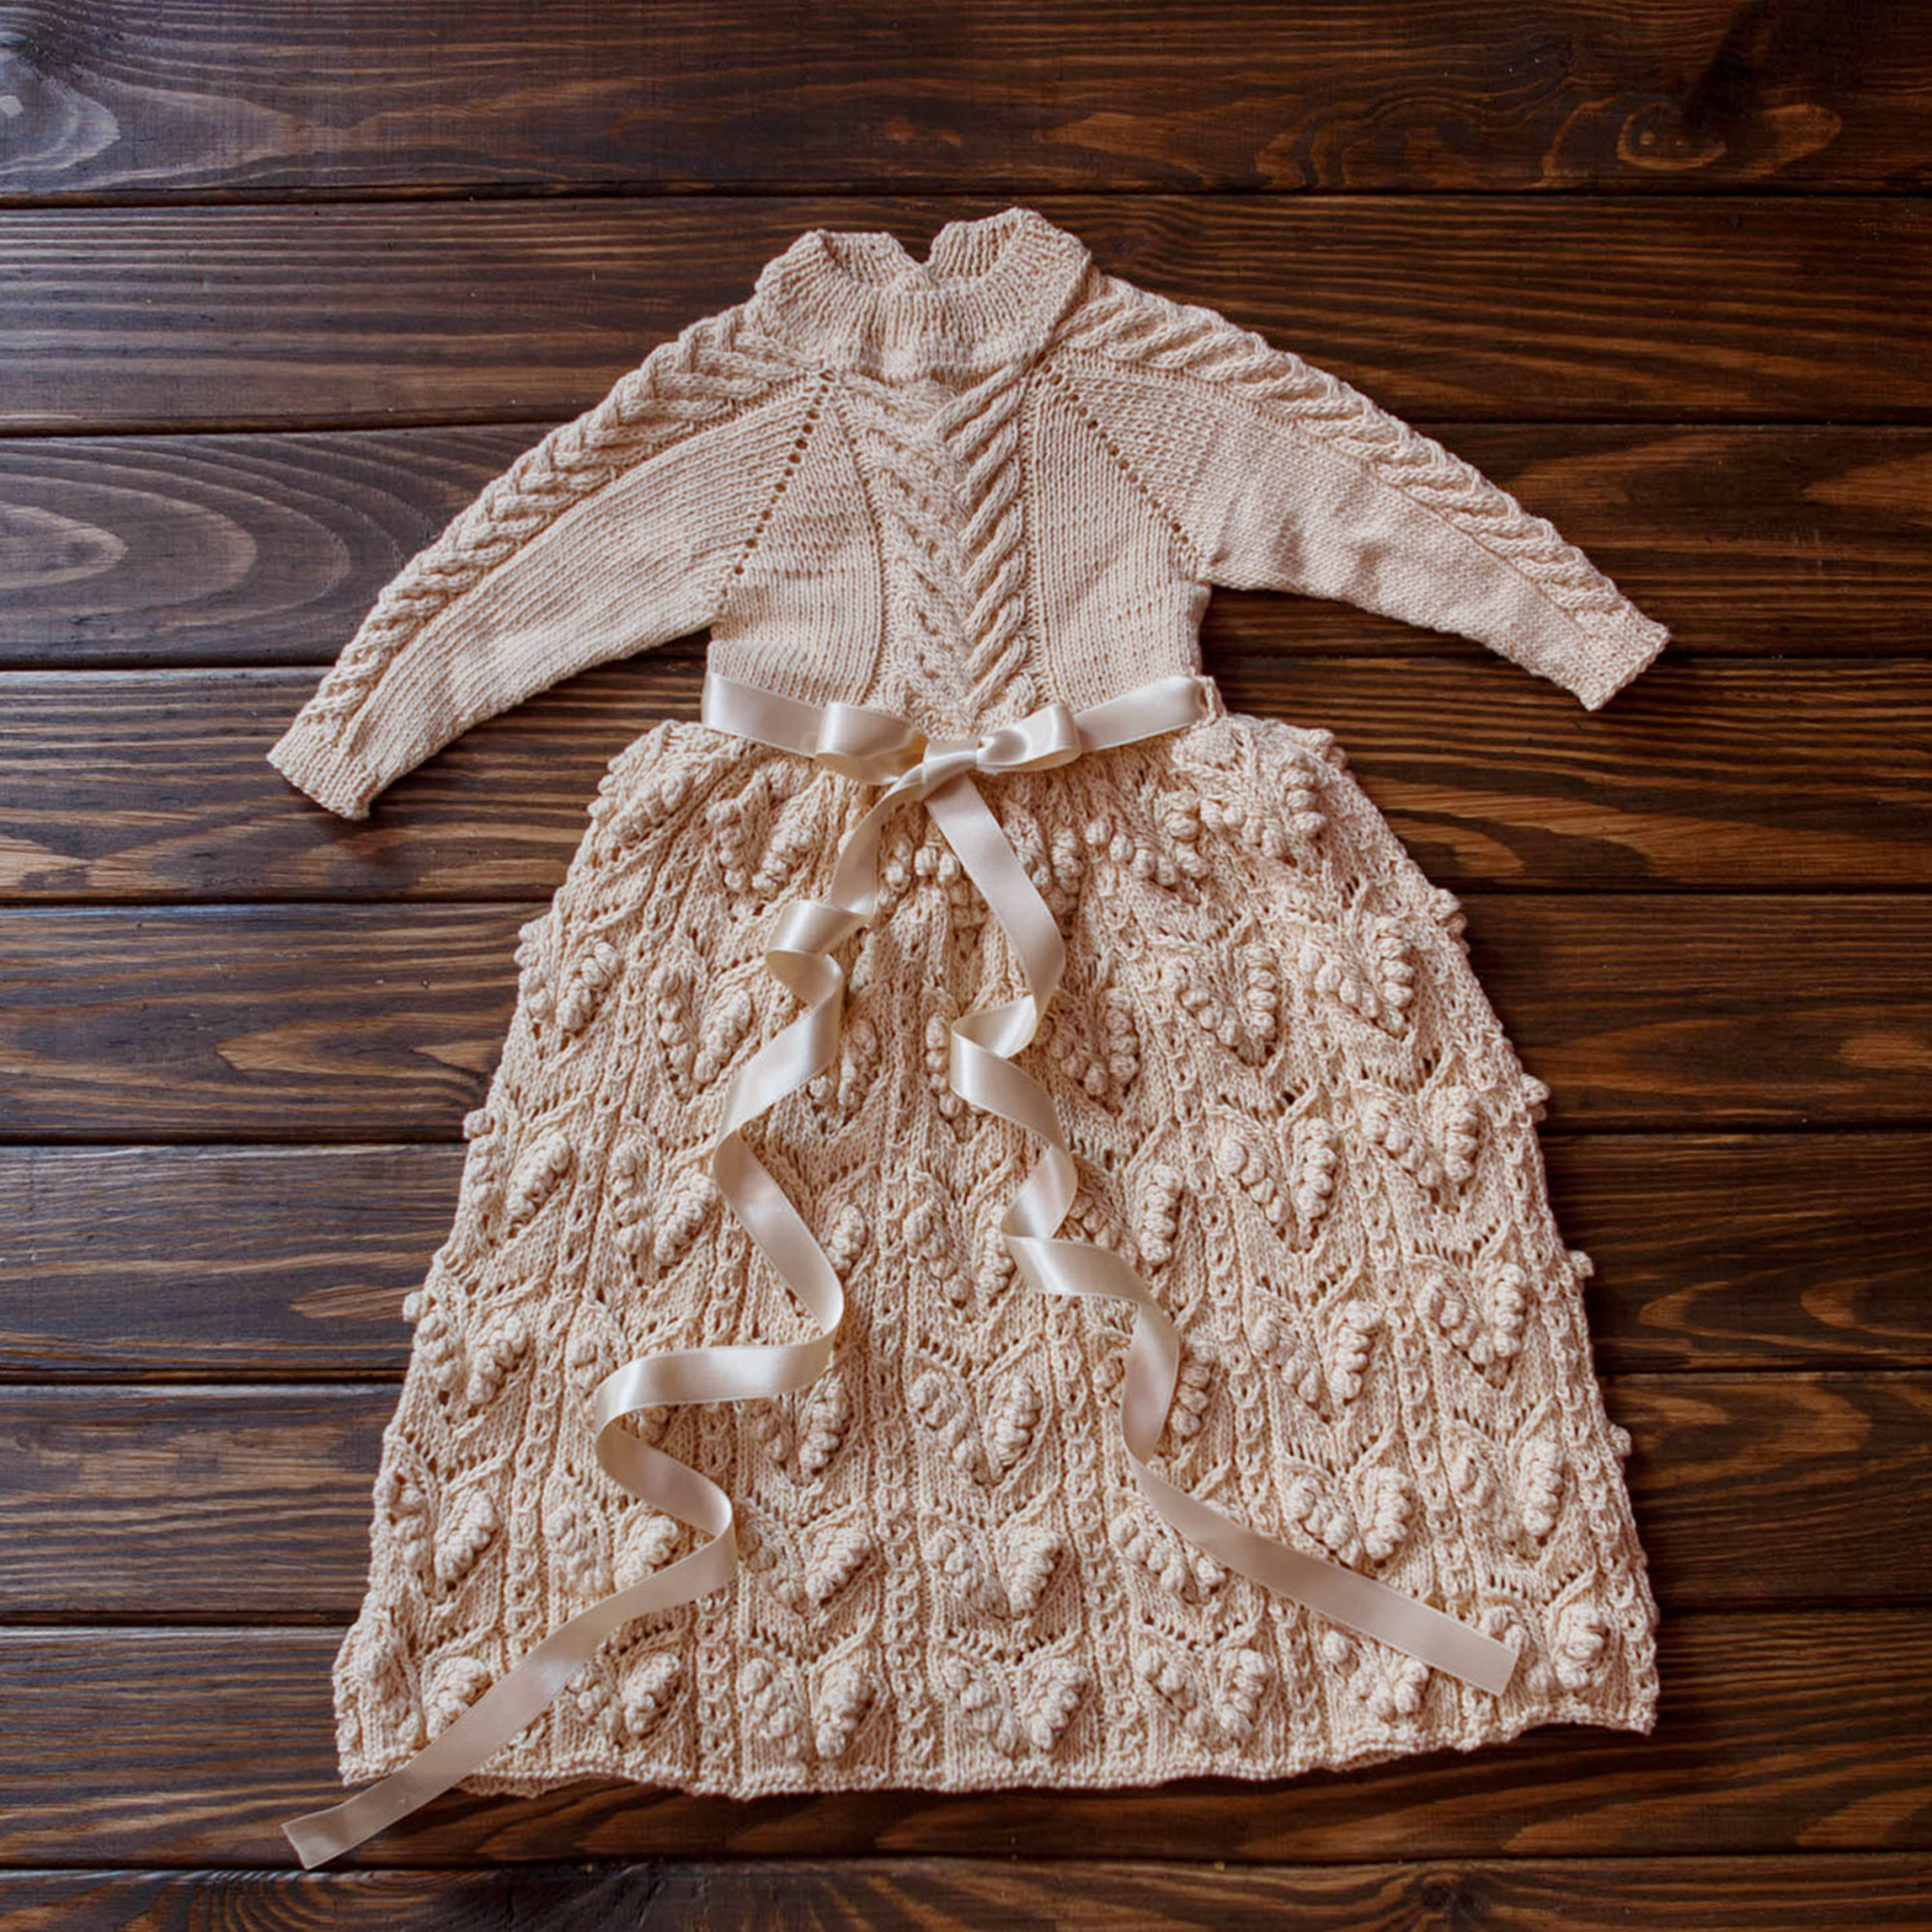 Entirely Knitted Beautiful Baby Girl Gown 2.1'-2.27' 6-9 months